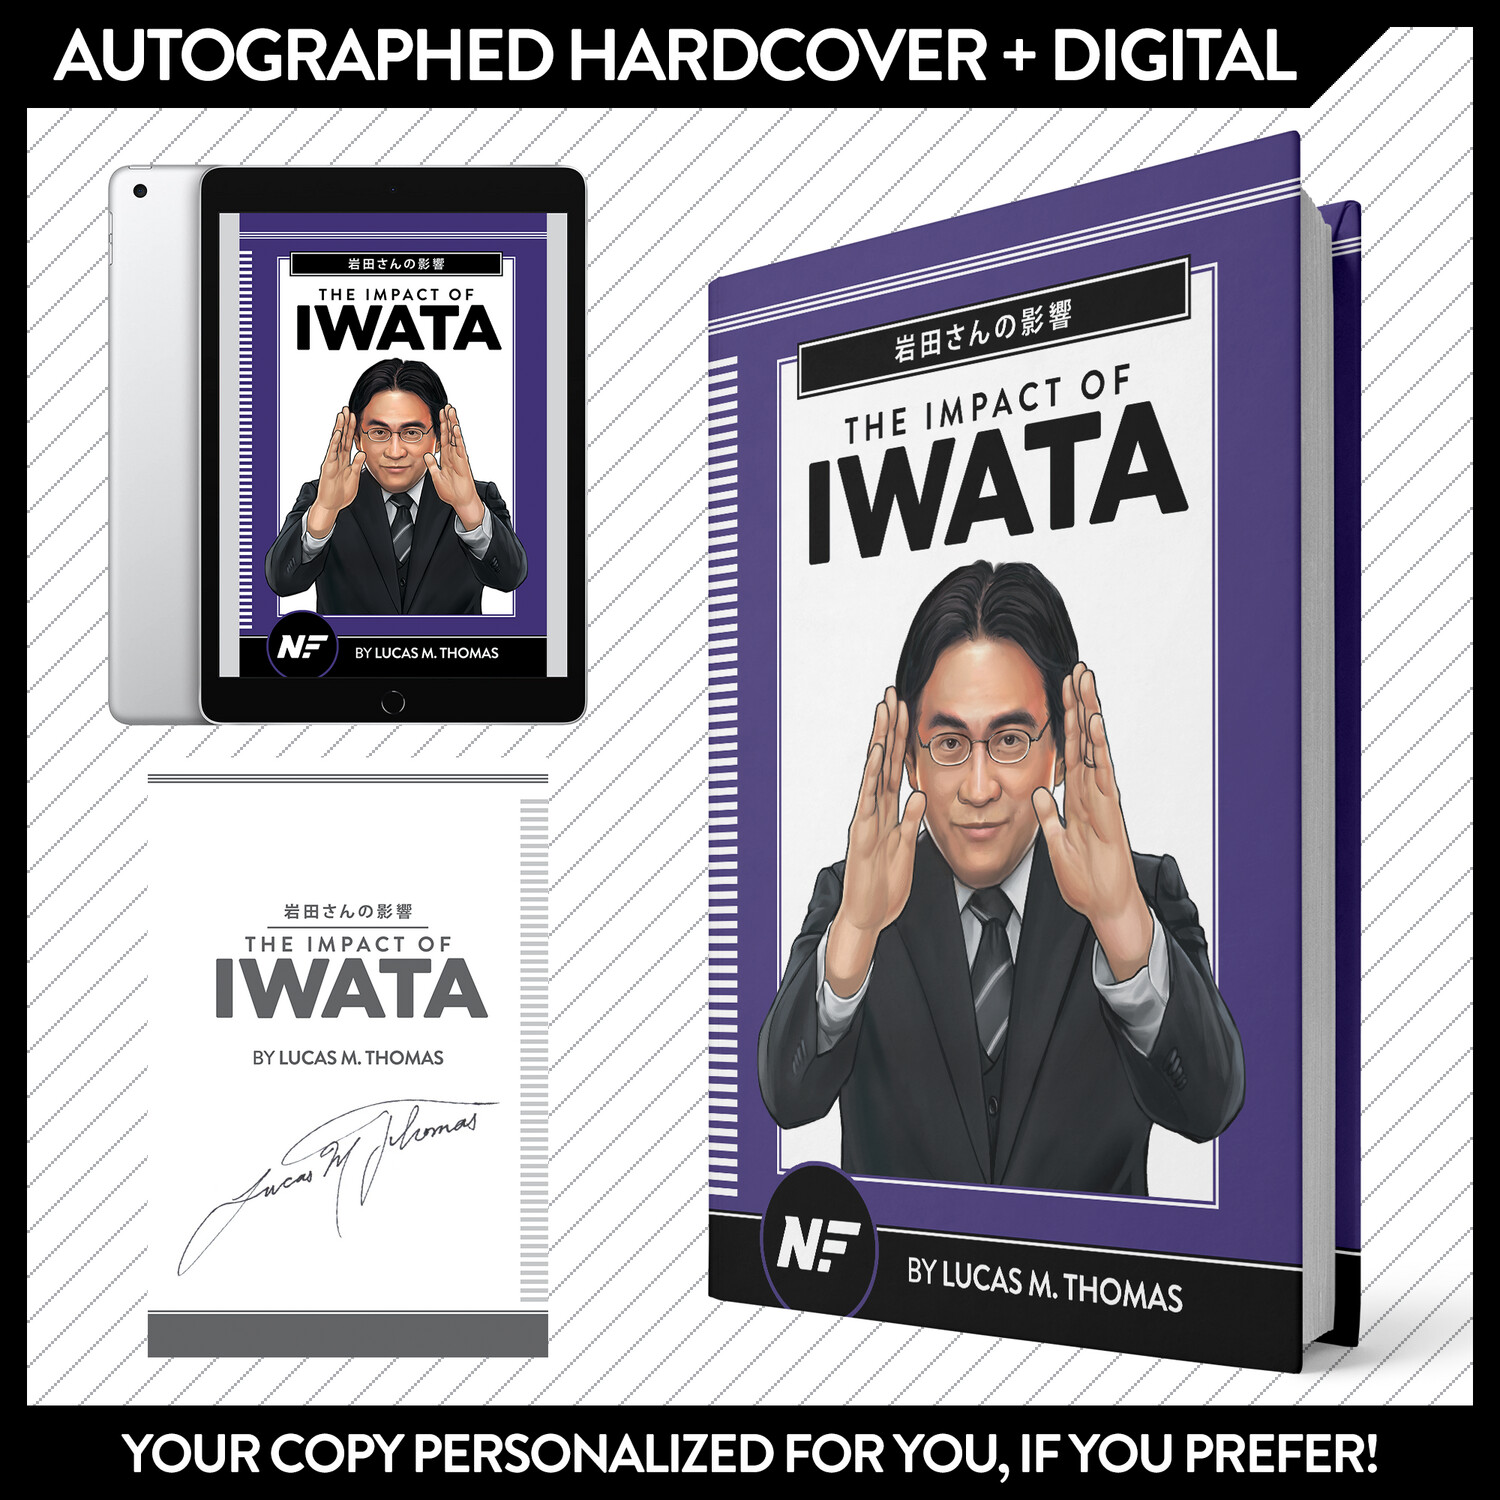 The Impact of Iwata - Autographed Hardcover + Digital